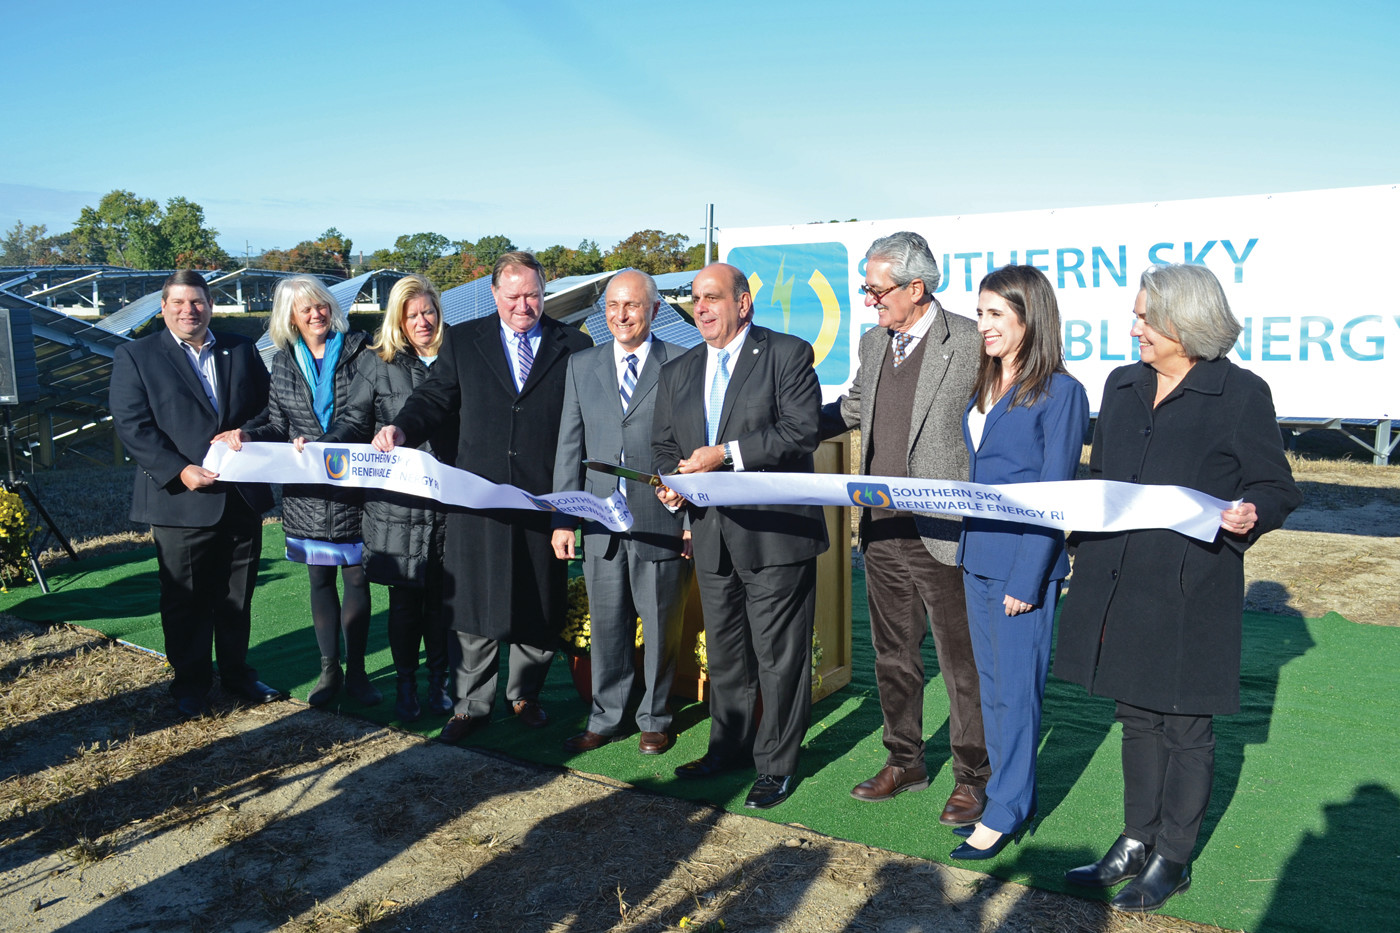 FLIPPING THE SWITCH: A ribbon cutting ceremony for the 15,800-panel array was held on Monday morning.